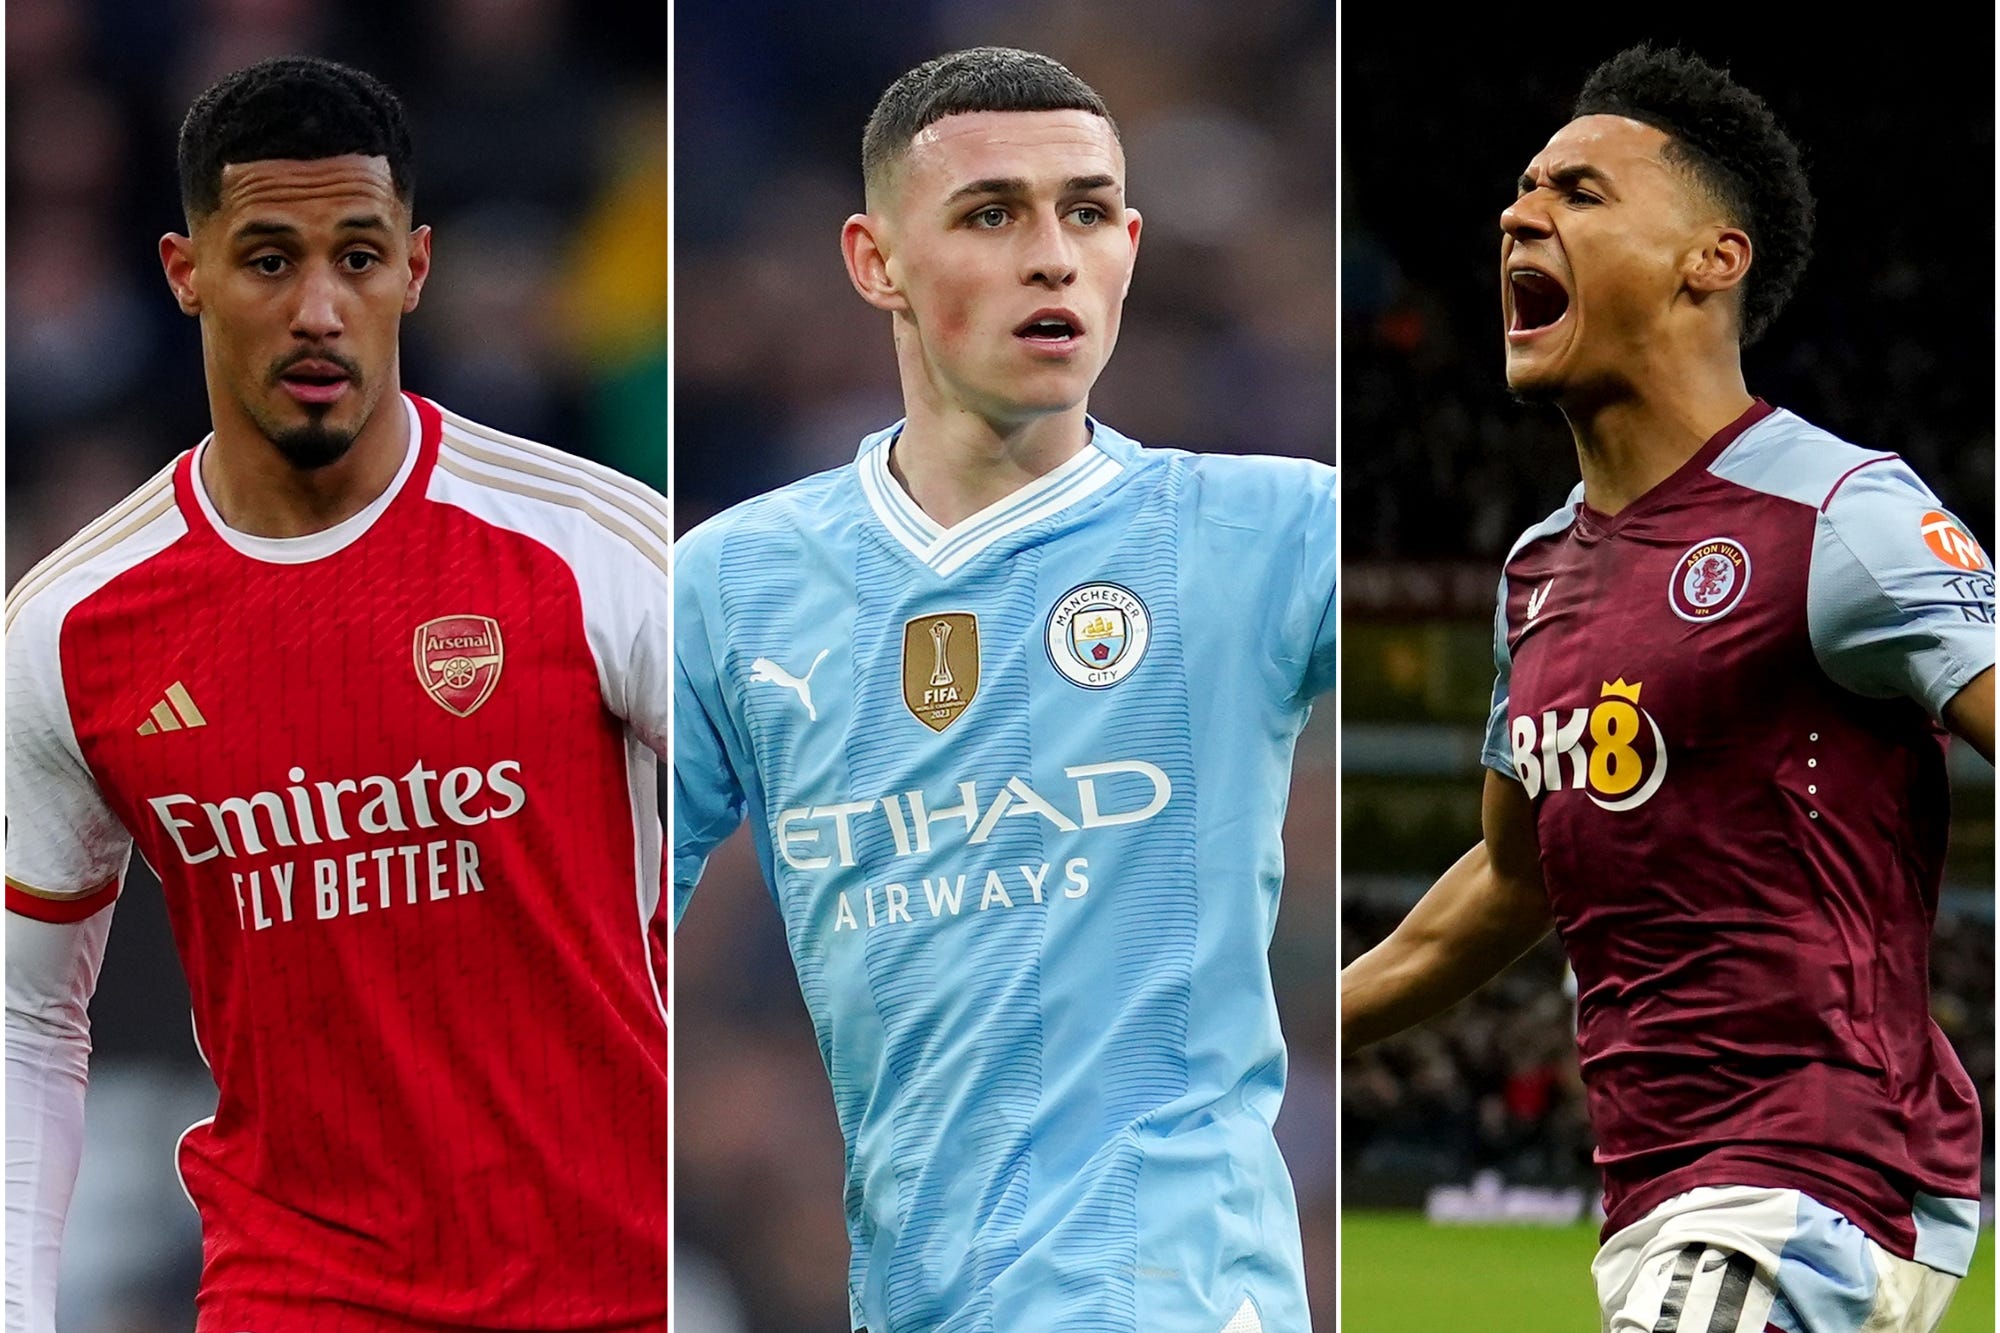 William Saliba, Phil Foden and Ollie Watkins have all enjoyed standout campaigns